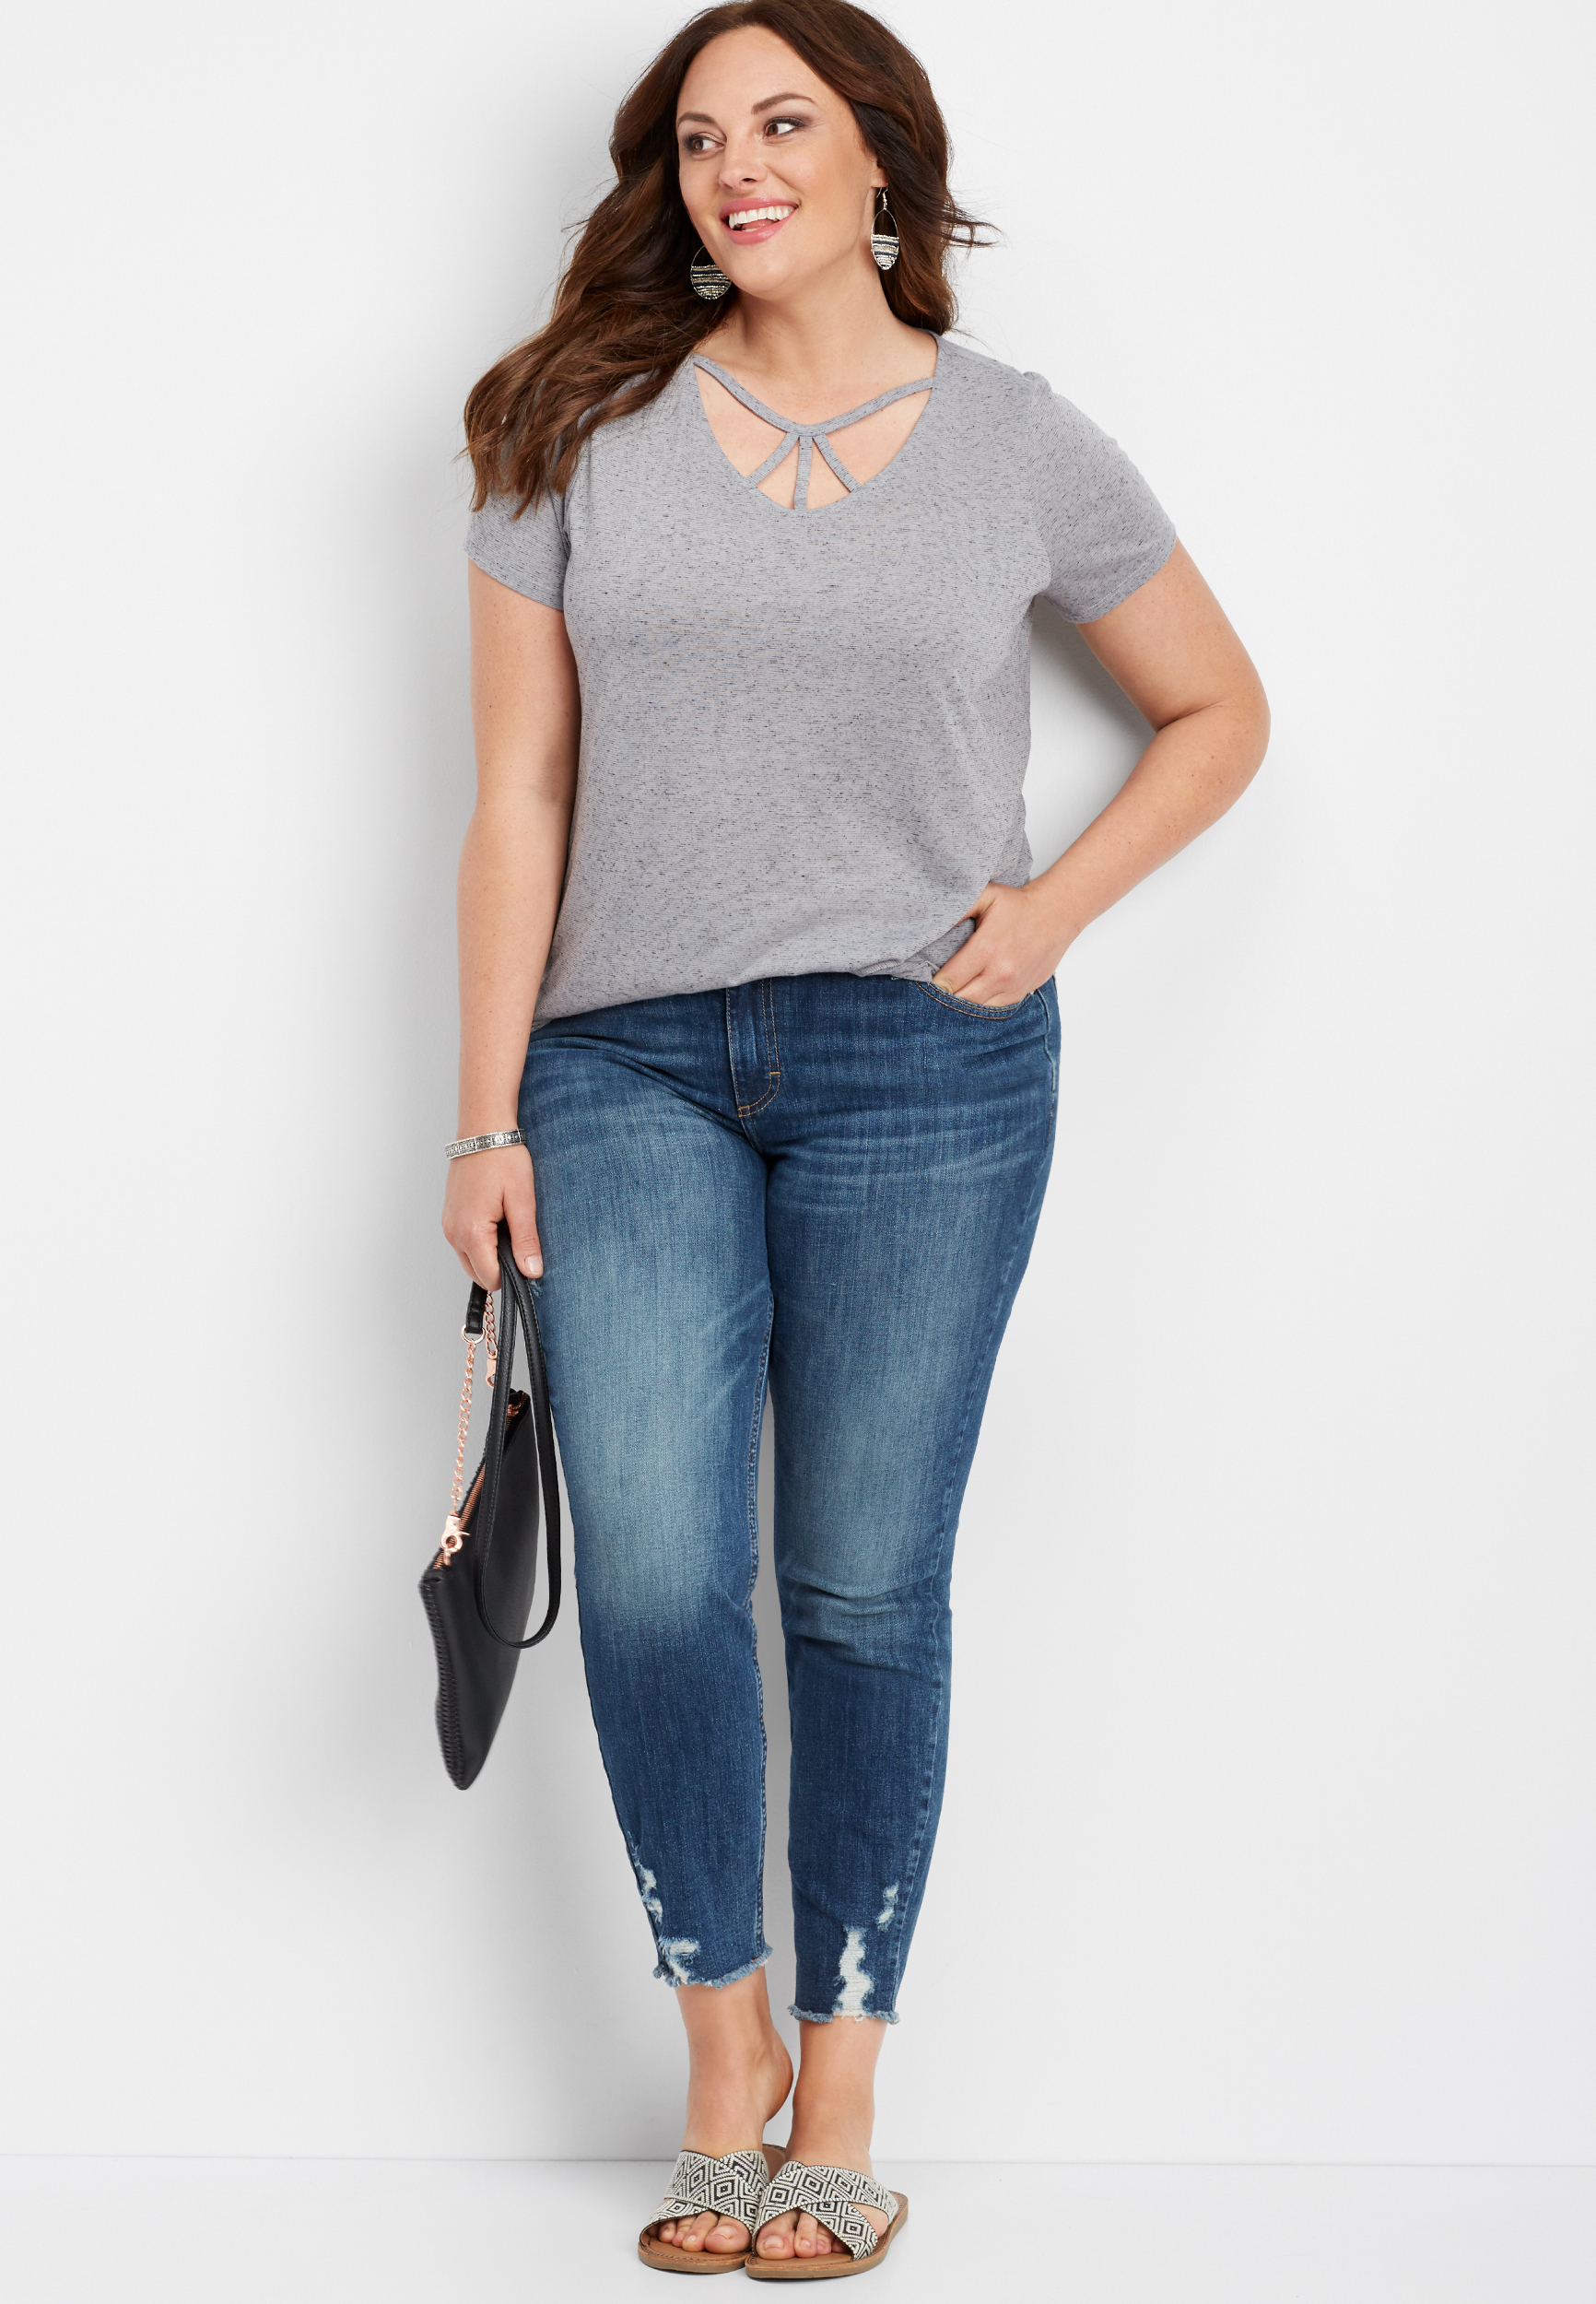 Plus Size Tees | maurices